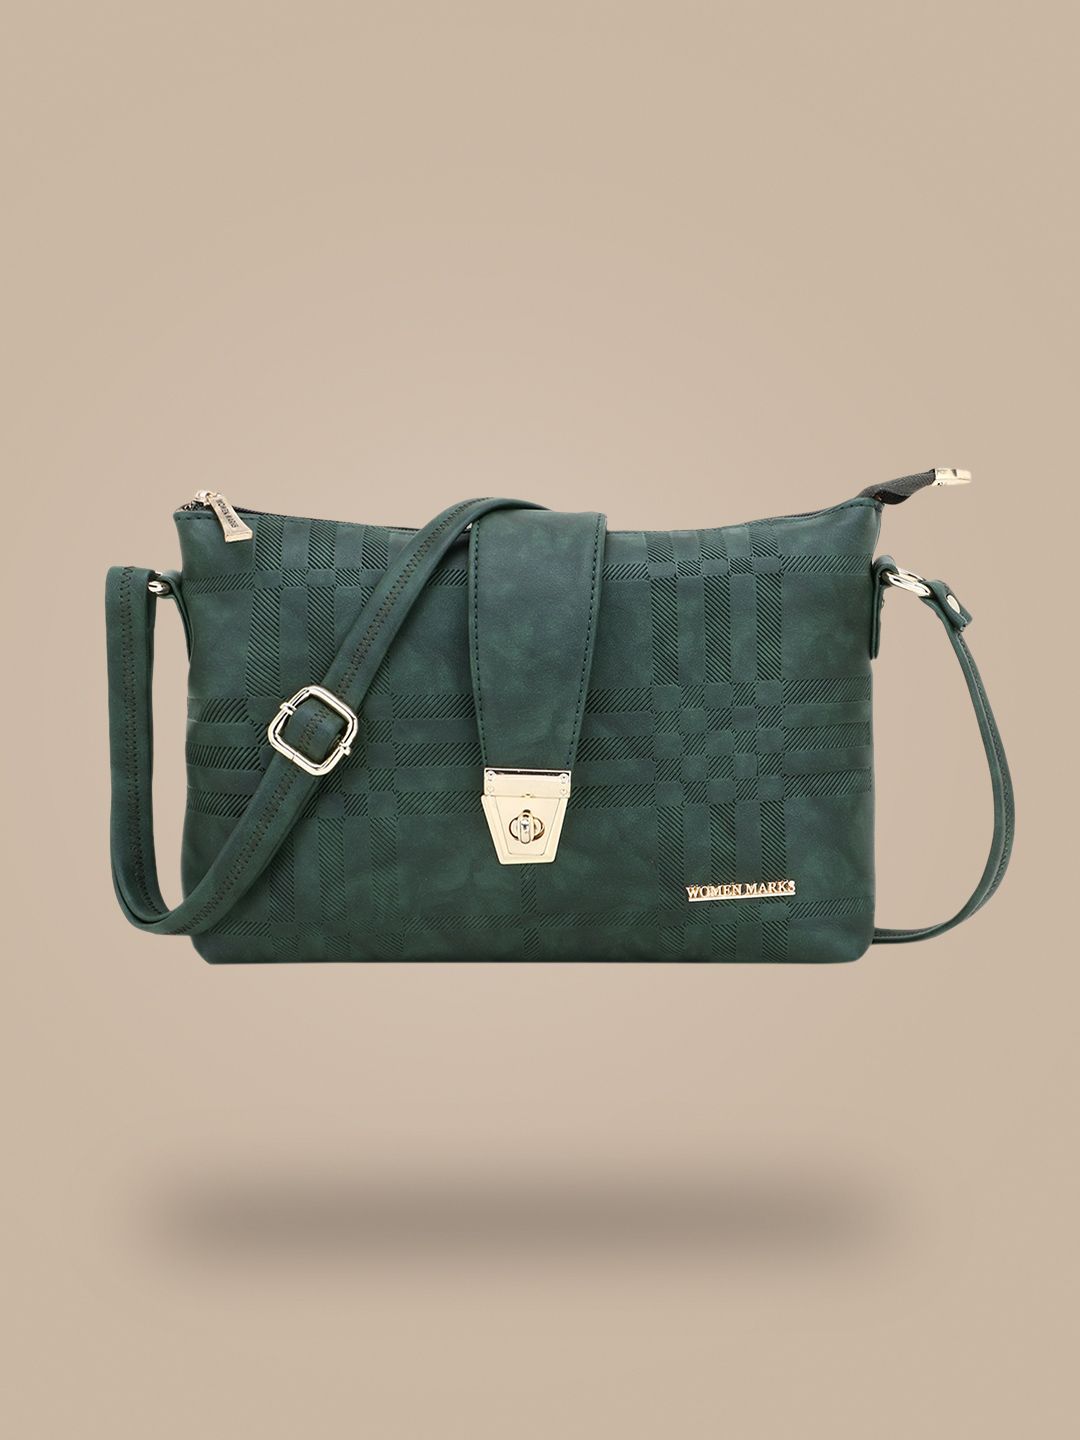 WOMEN MARKS Woman Green Textured PU Oversized Structured Sling Bag Price in India